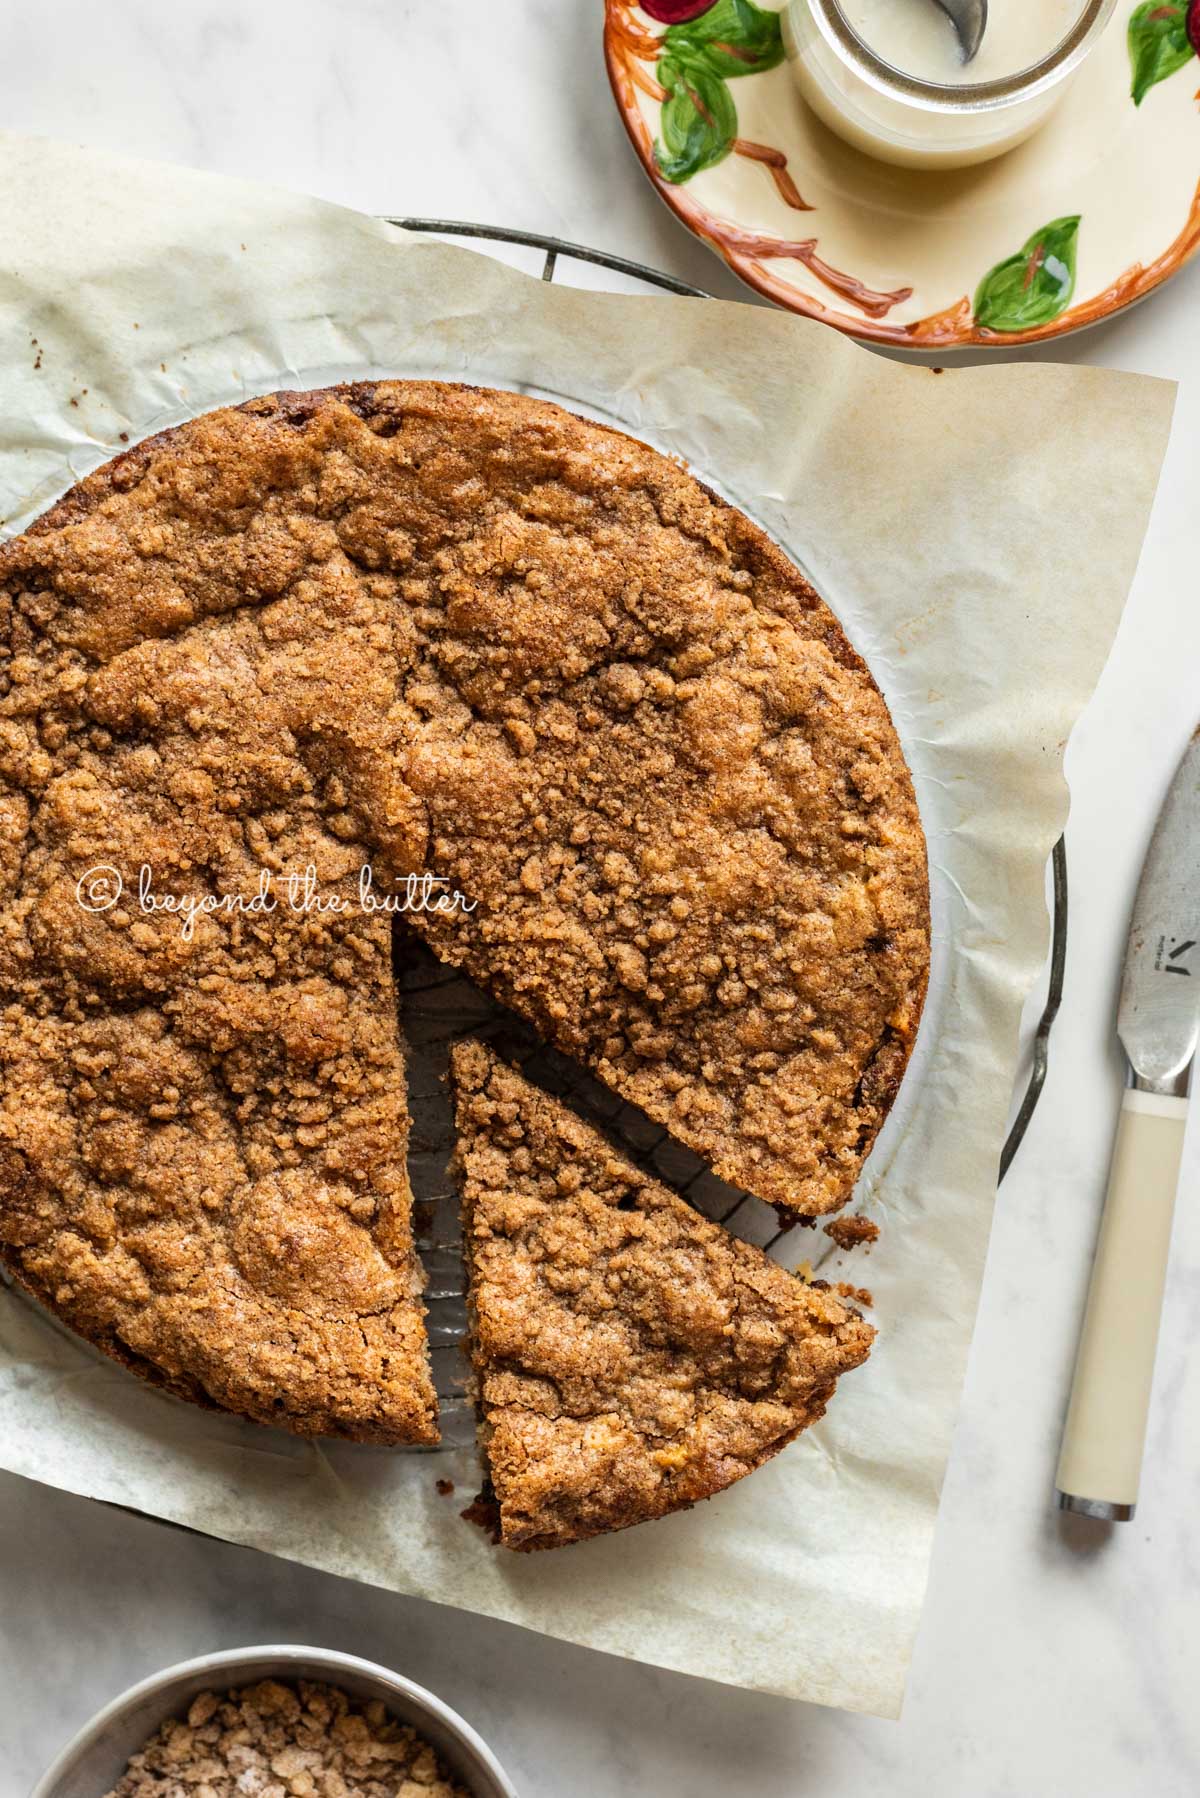 Image of apple coffee cake with slice cut and partially removed | All Images © Beyond the Butter™